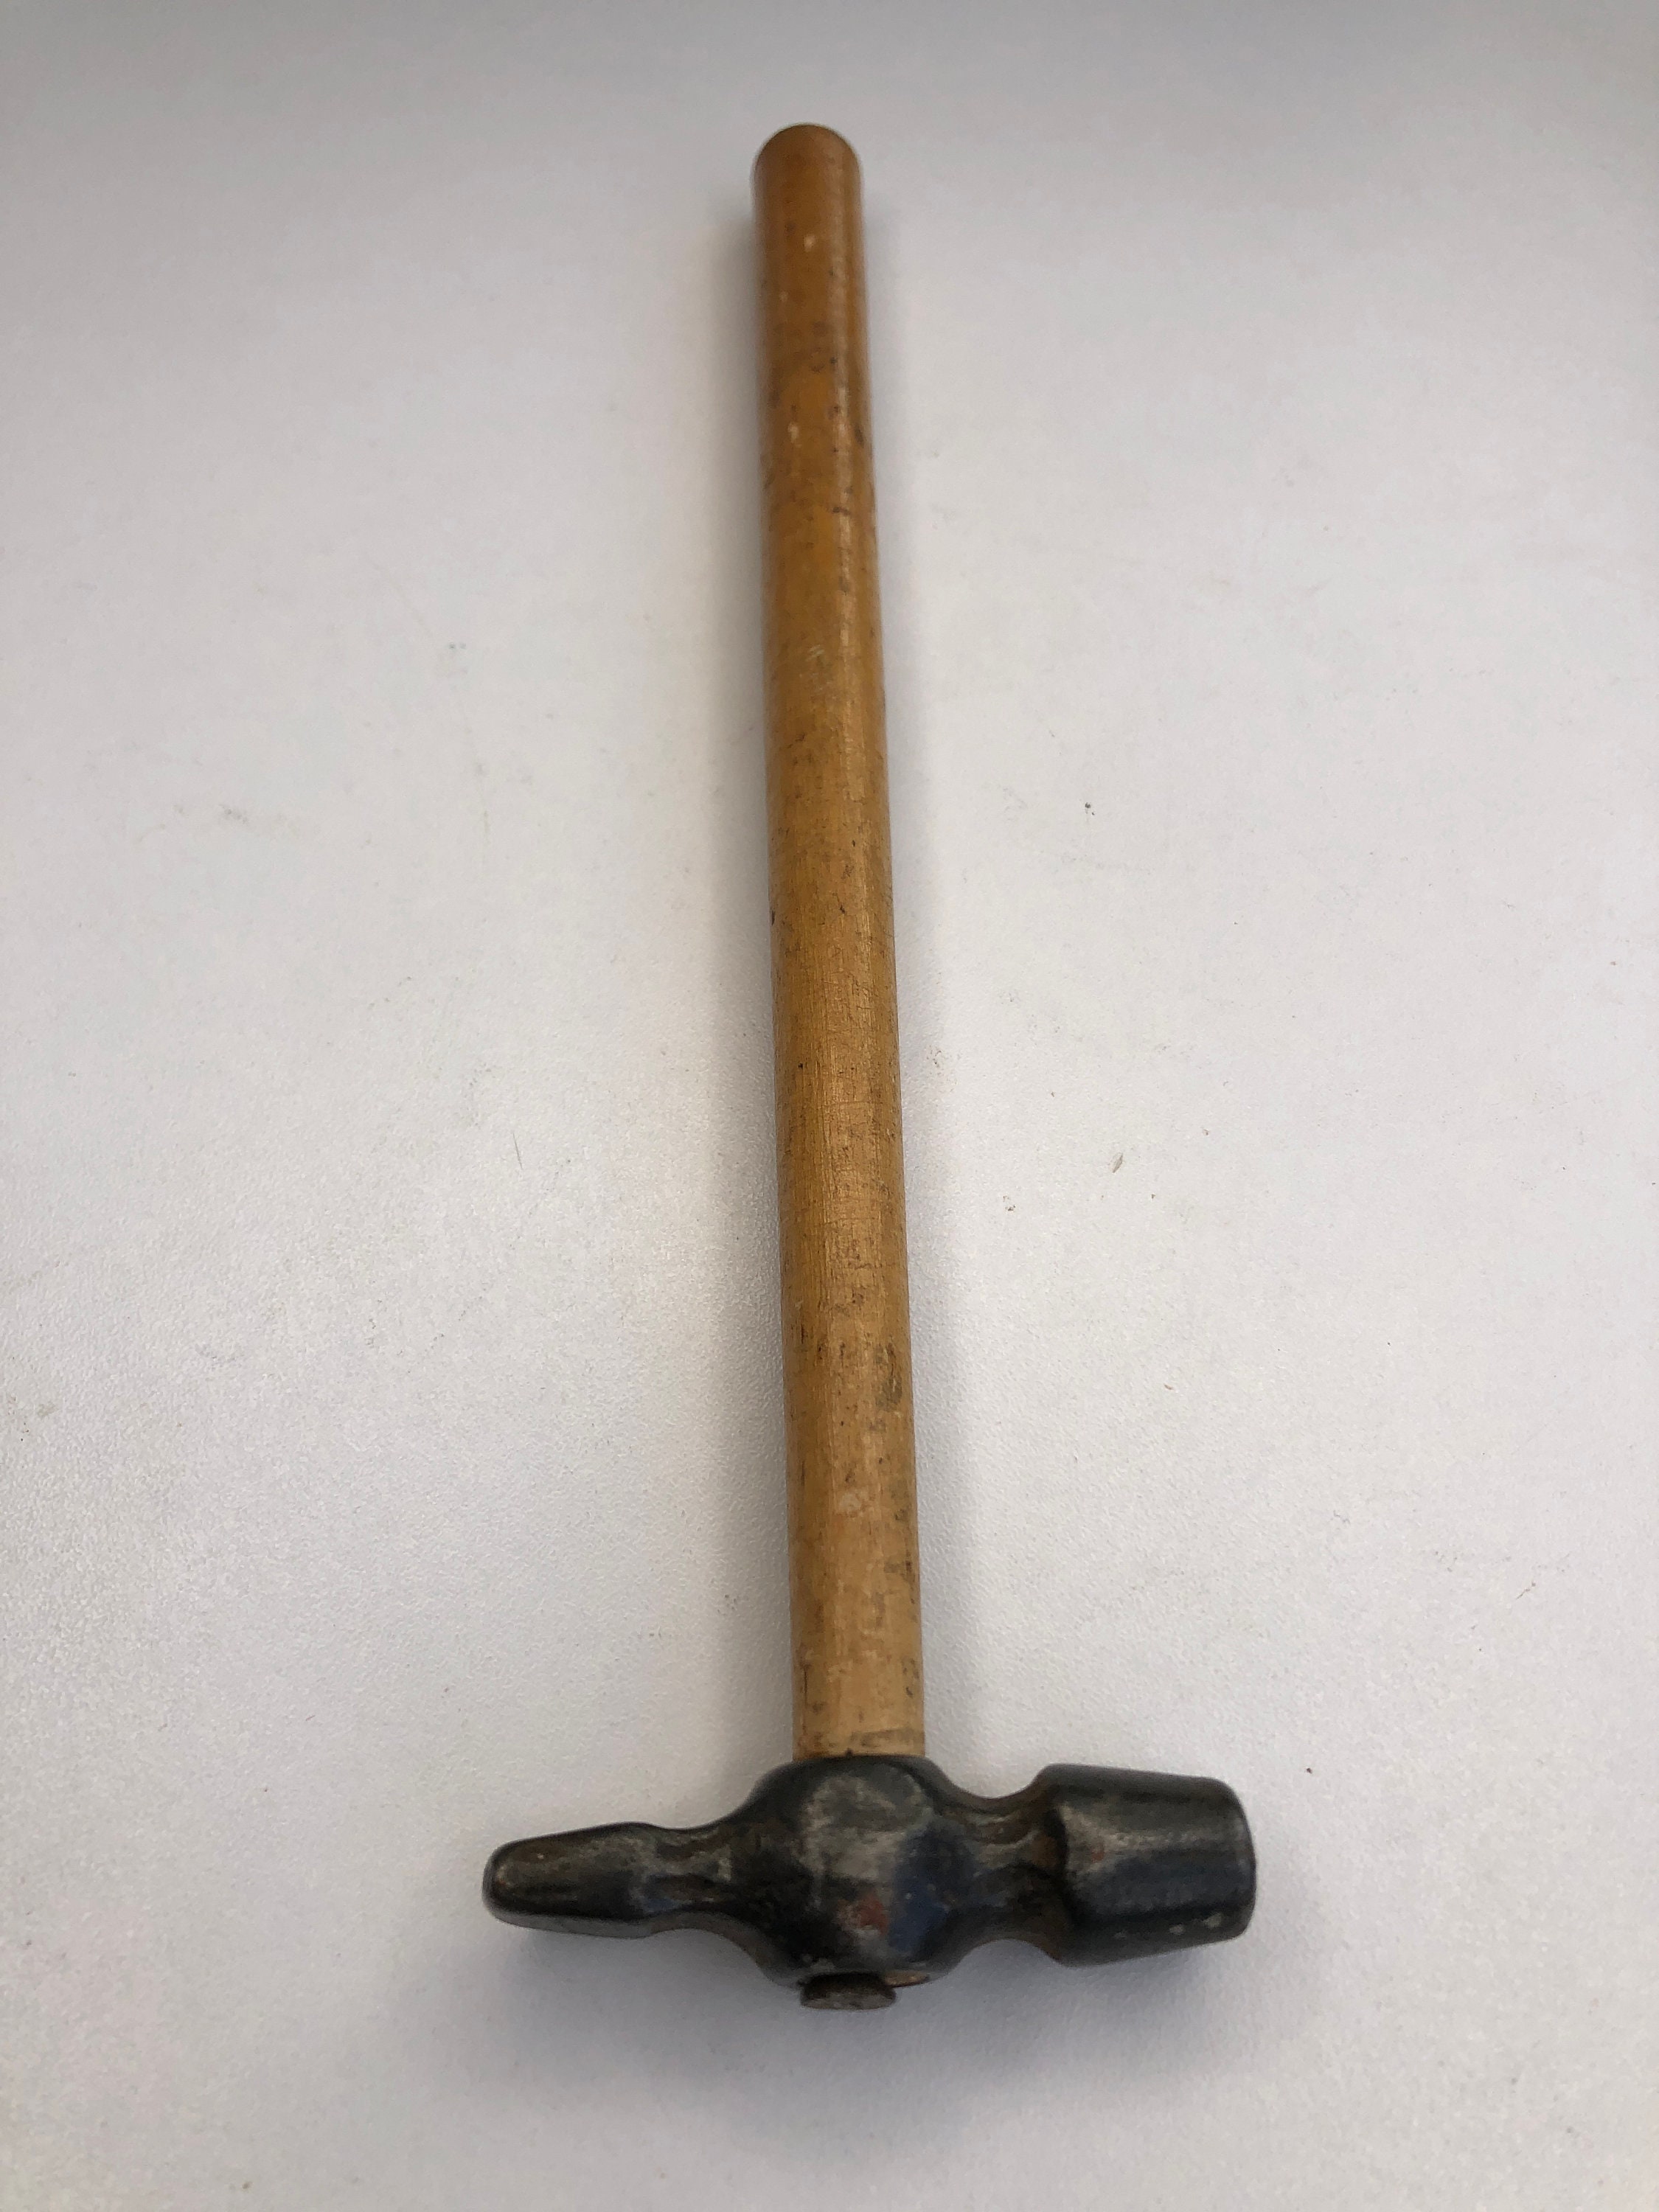 Tiny unmarked watchmaker’s hammer